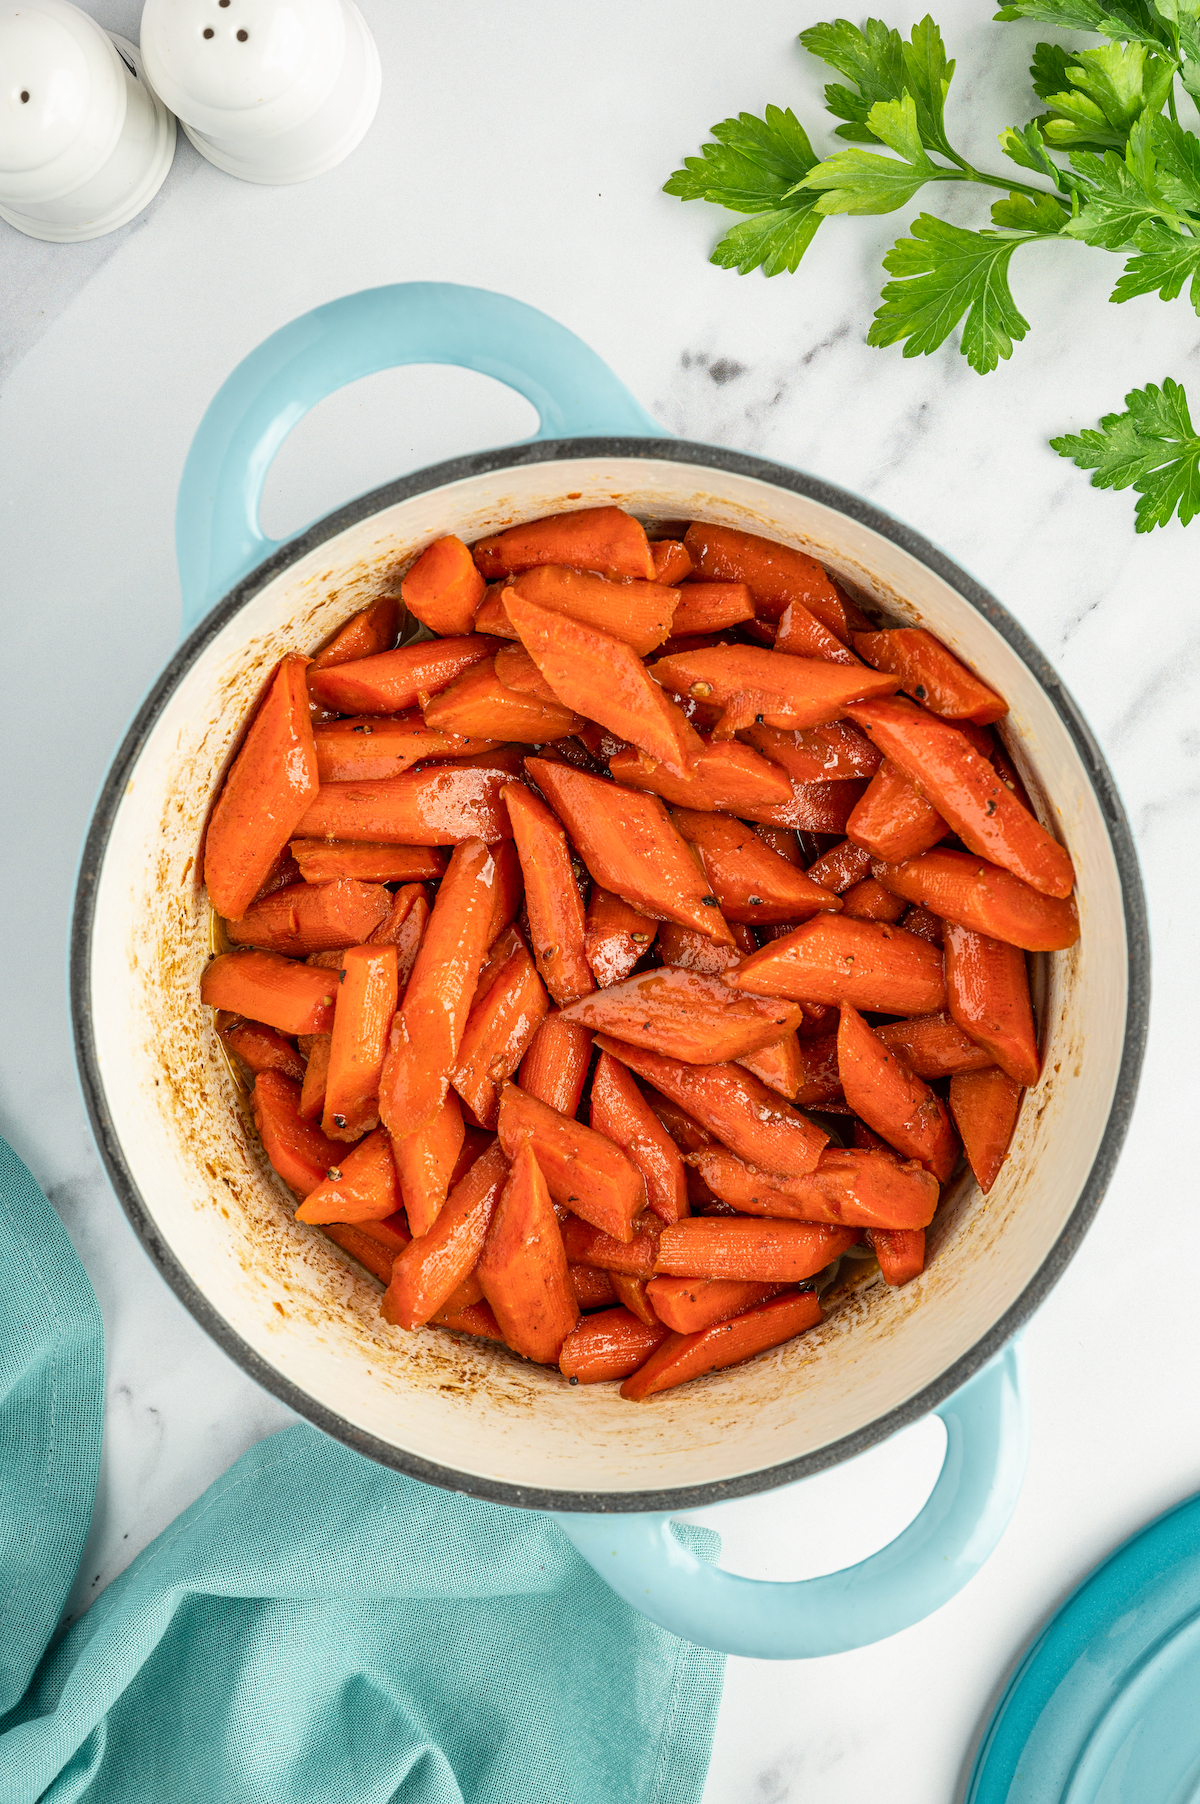 Simmered carrots in a glaze-like sauce.